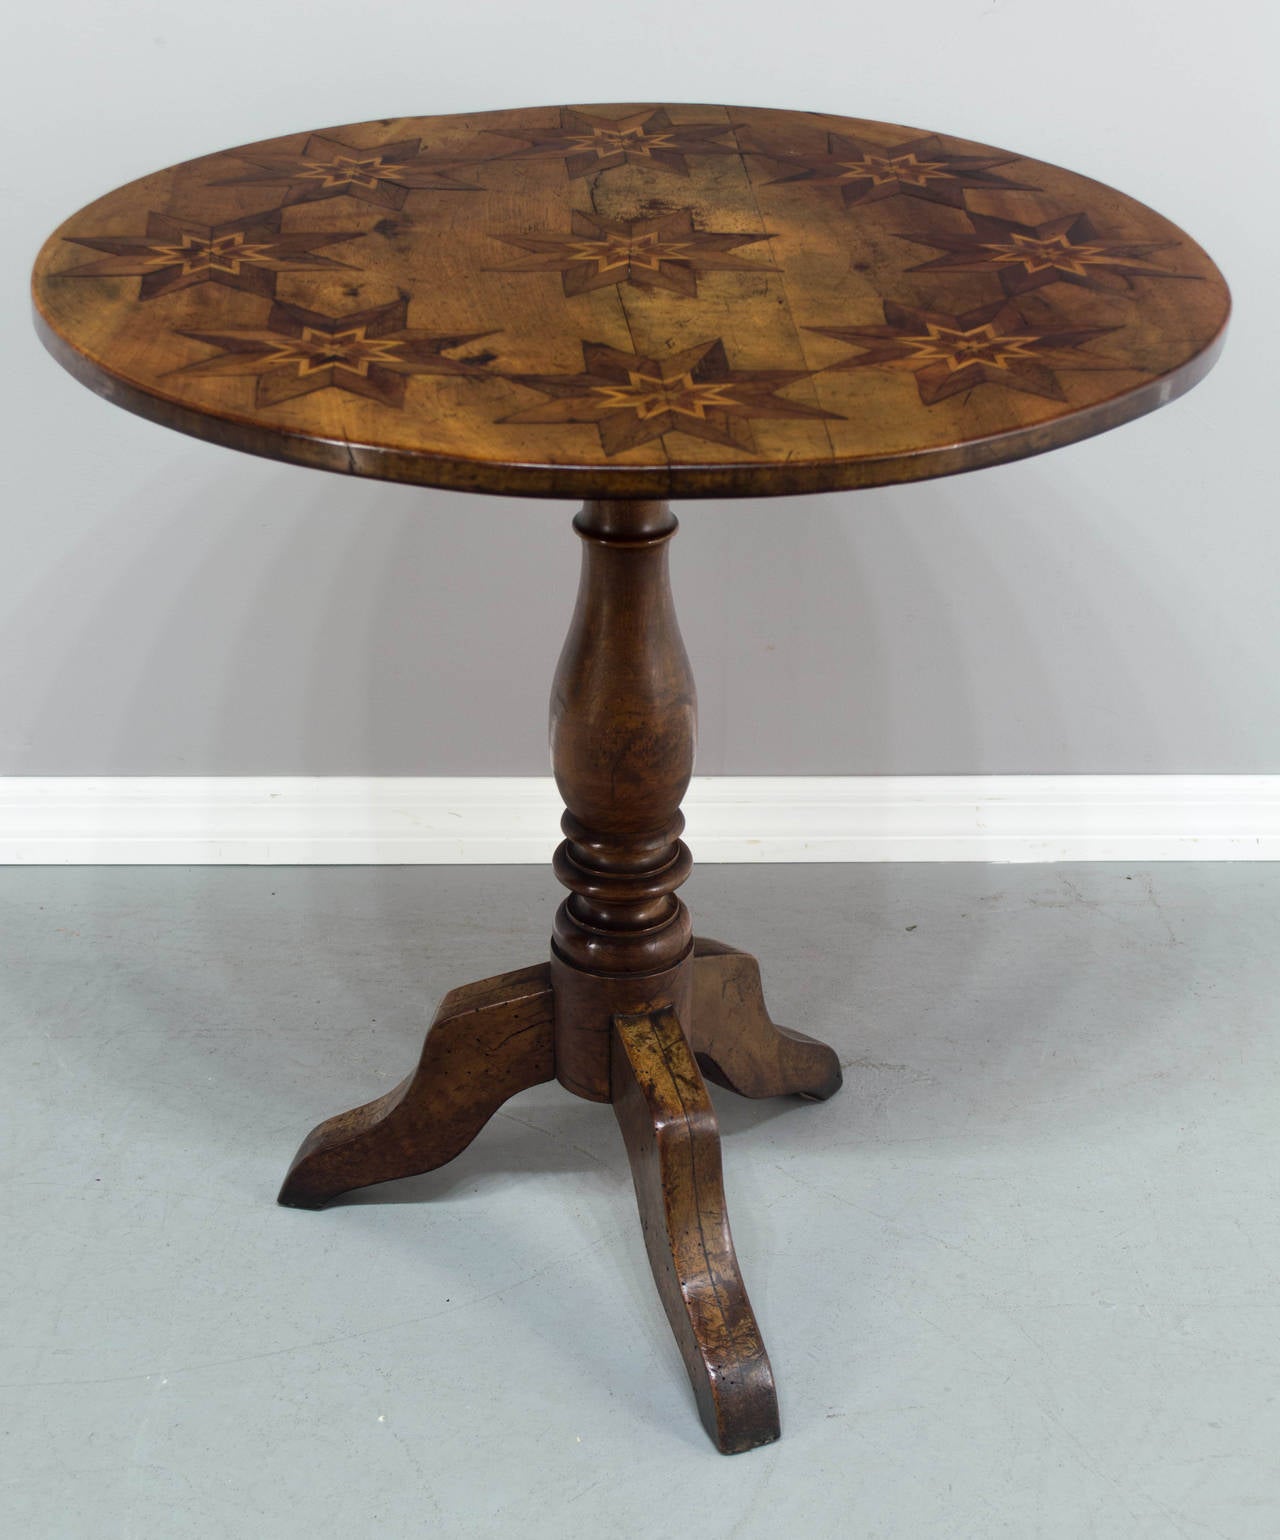 19th century Louis Philippe gueridon or tilt-top table, made of walnut with inlaid stars. Great craftsmanship. All original. French polish finish. Height when tilted: 45.5